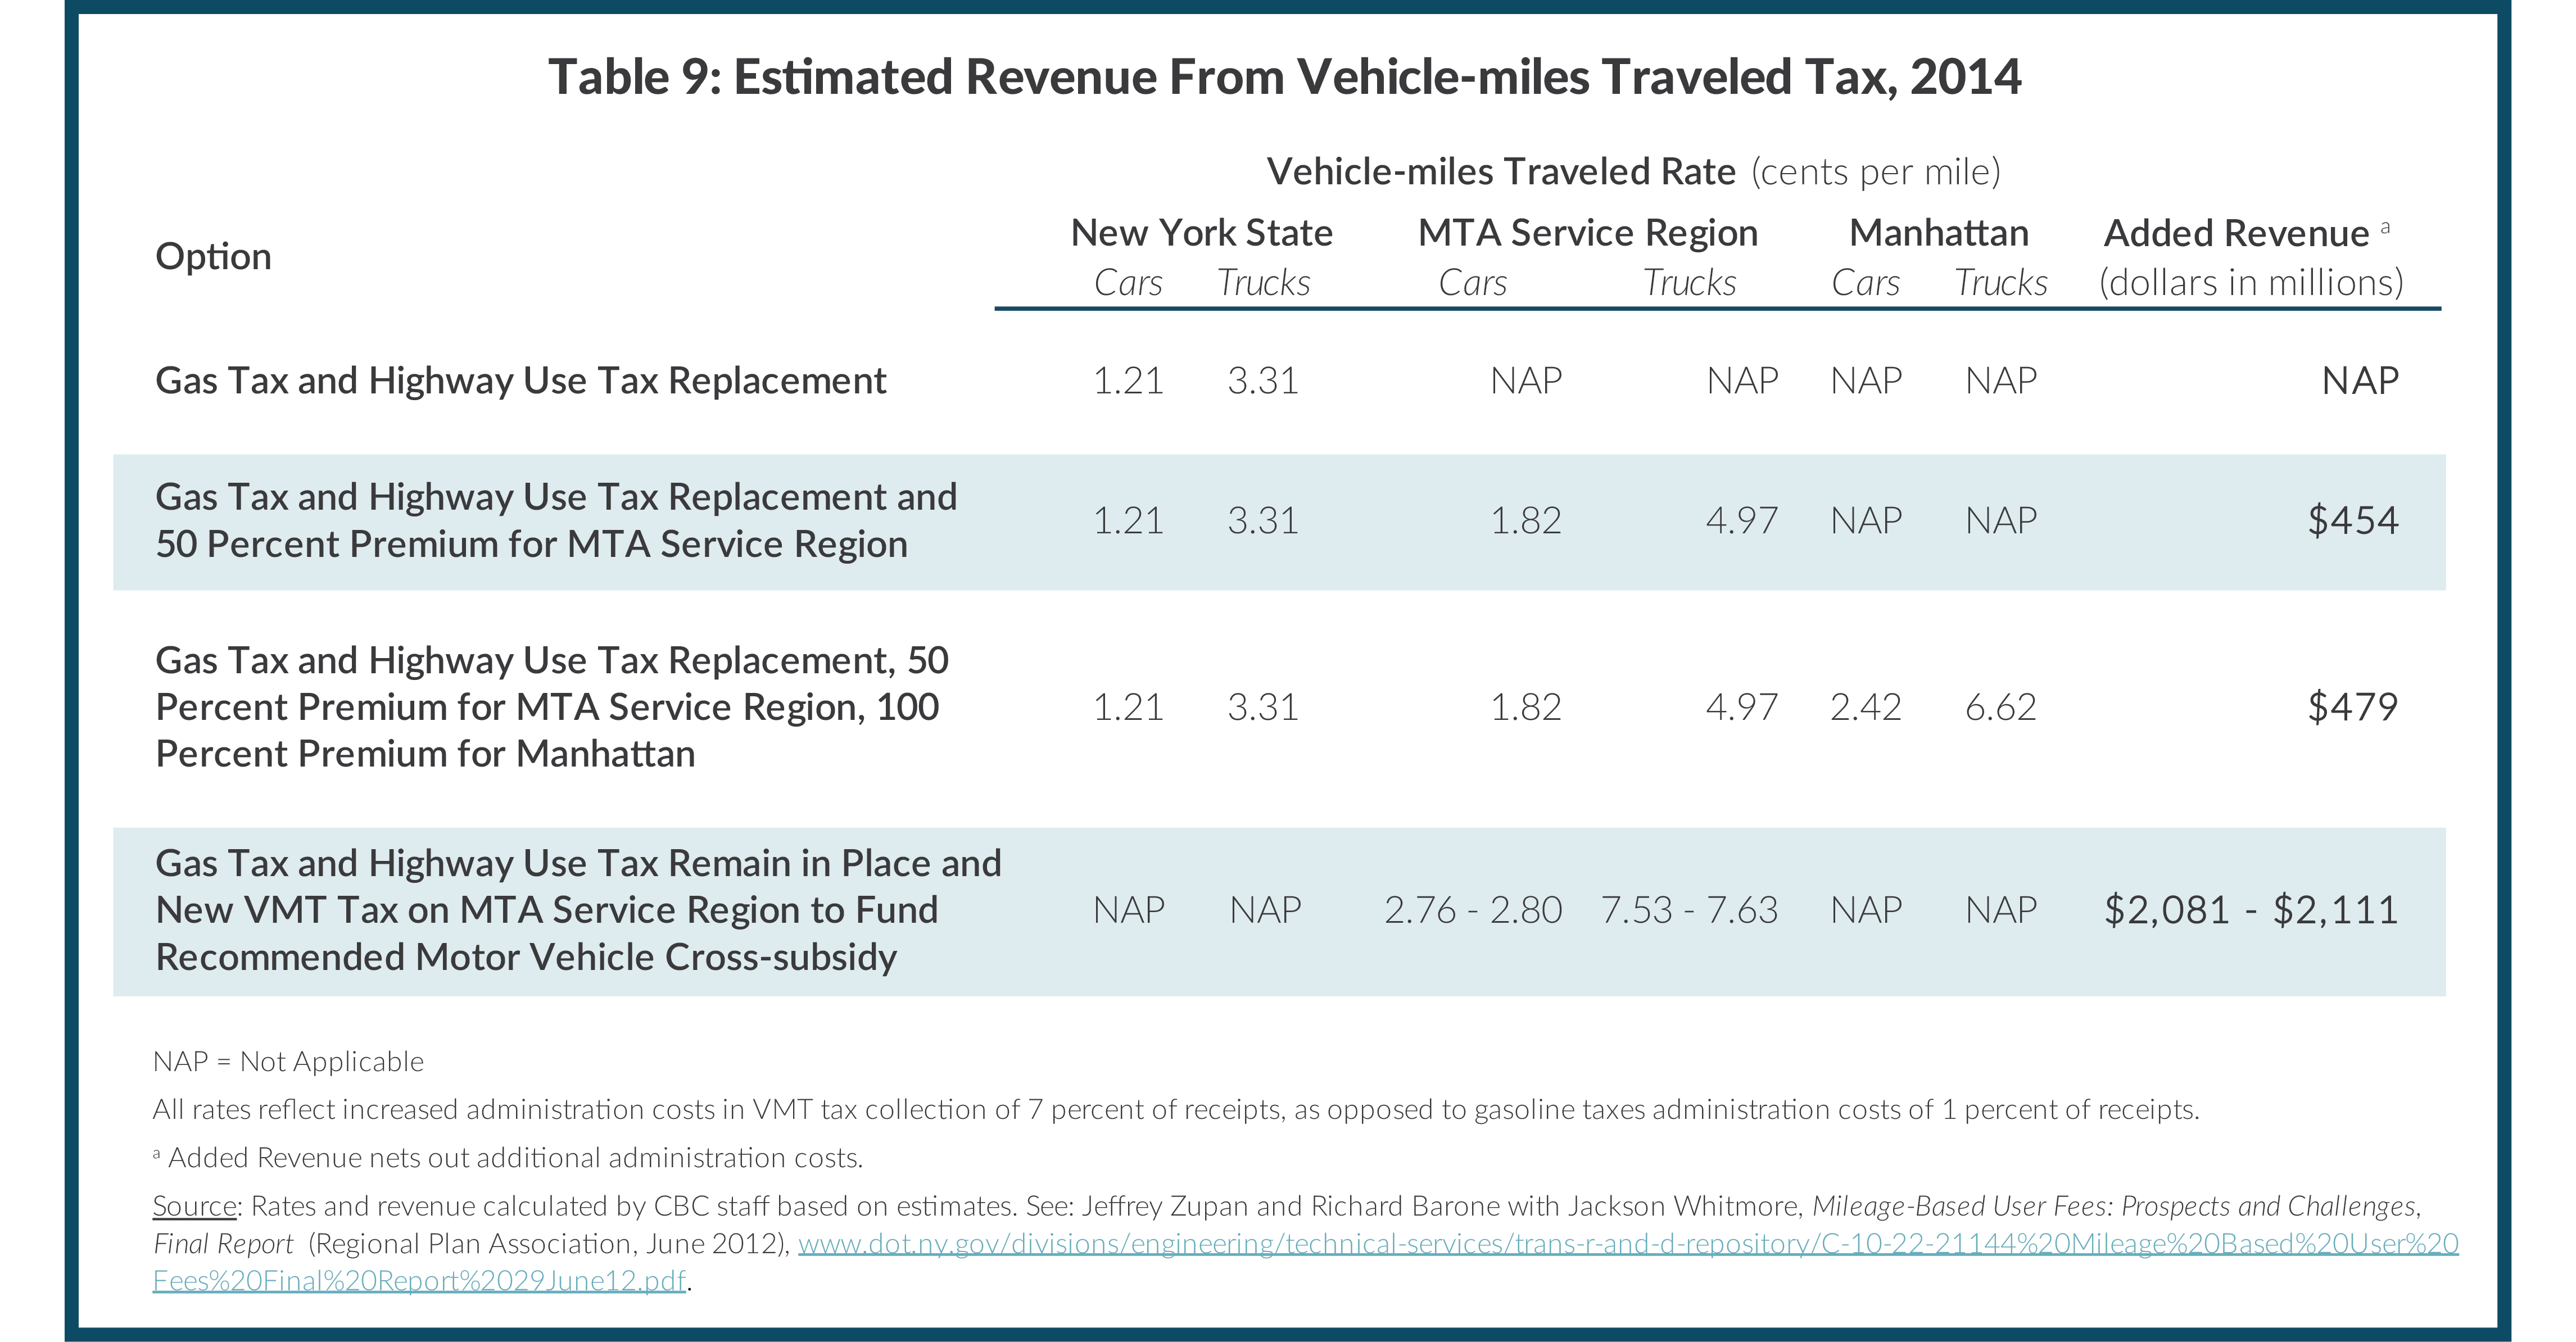 Table 9: Estimated Revenue From Vehicle-miles Traveled Tax, 2014